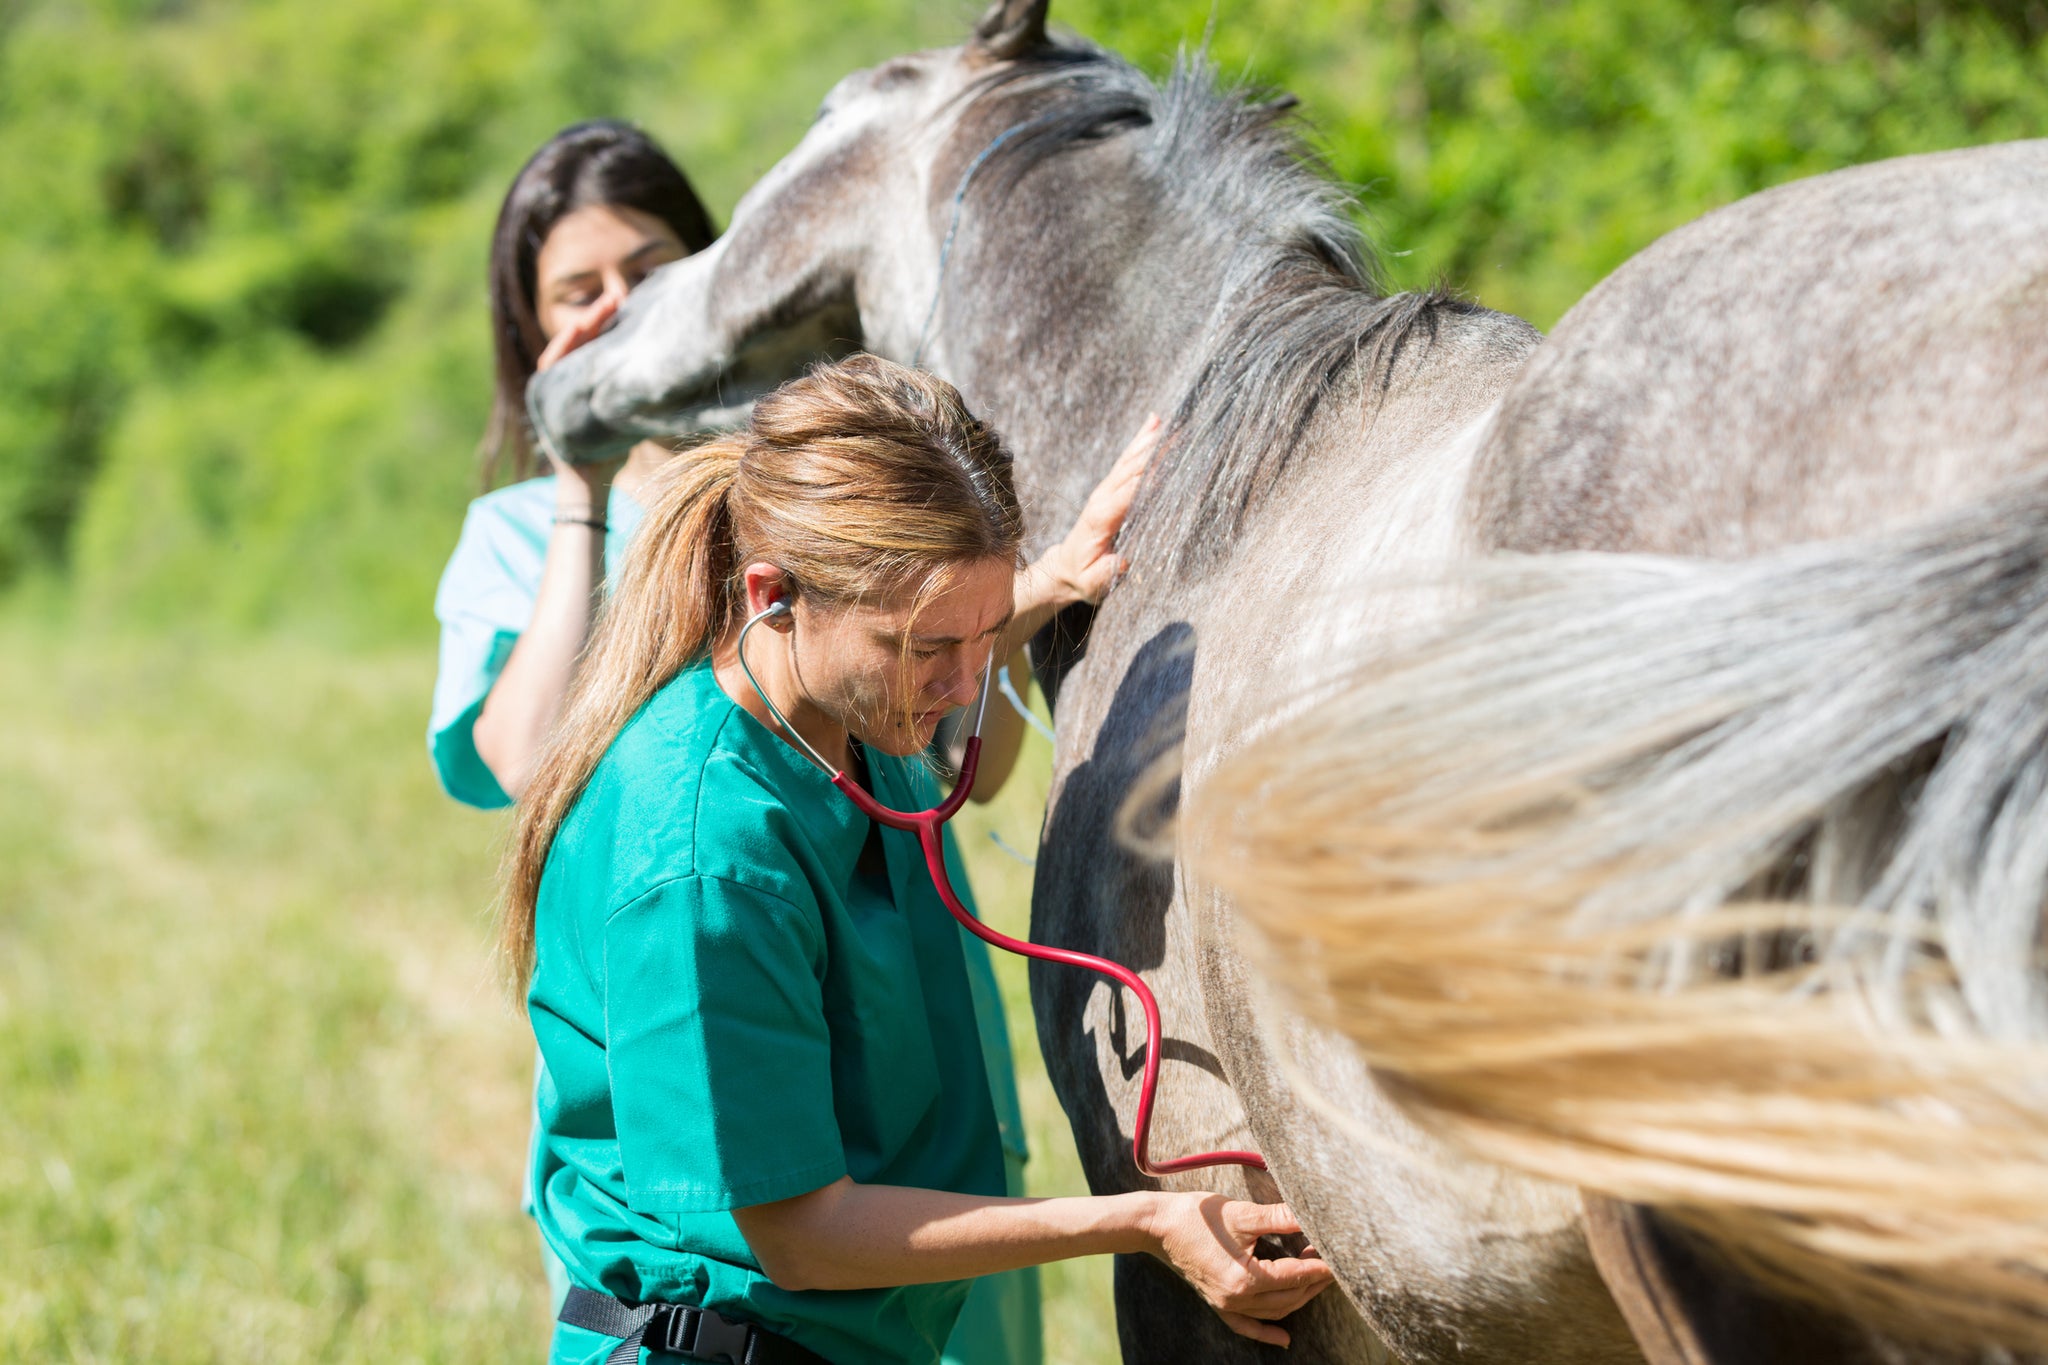 Equine Asthma: A new term for an old problem